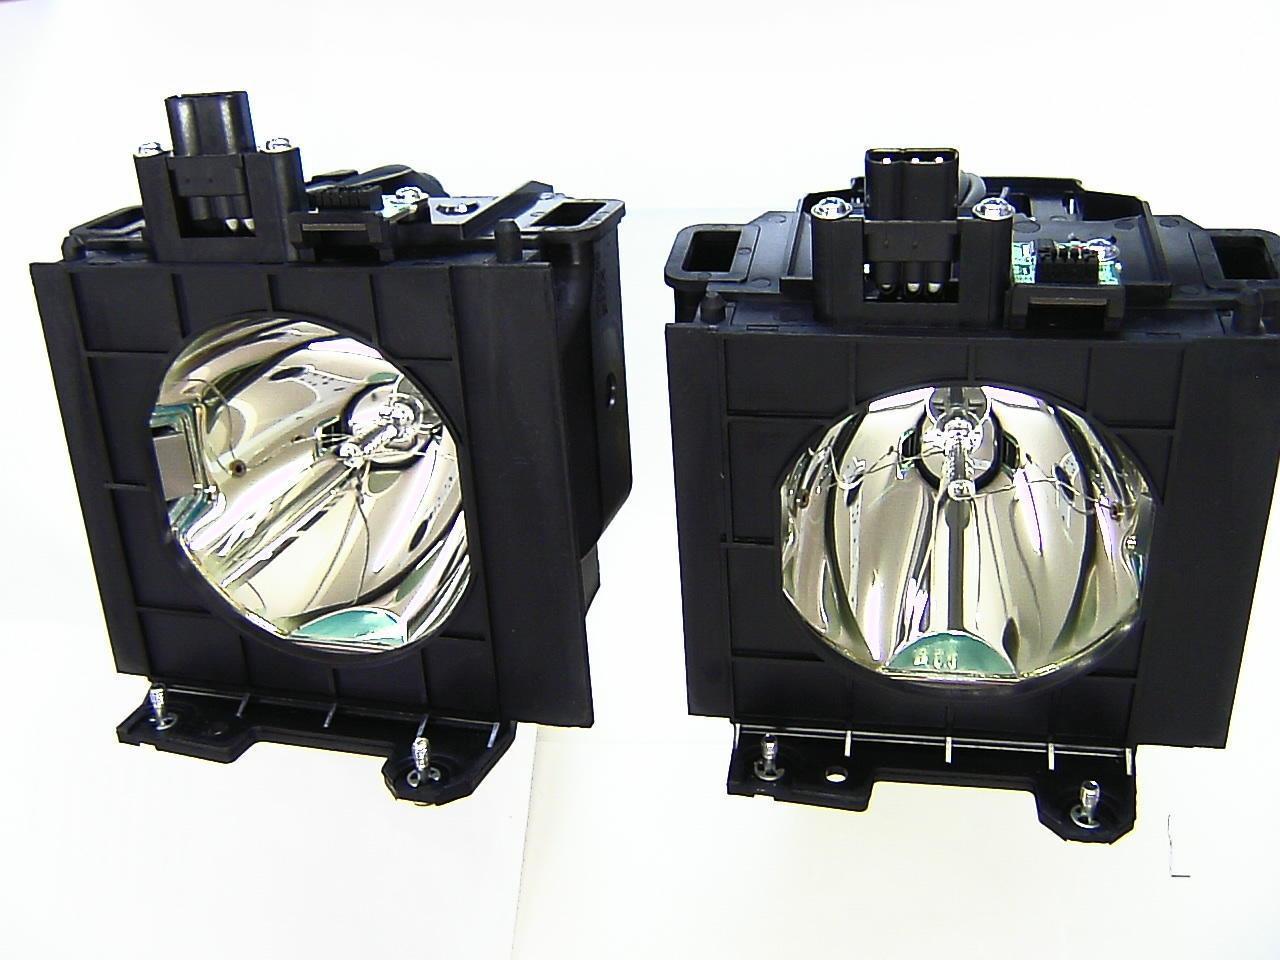 PTDW5100L Panasonic Twin-Pack Projector Lamp Replacement (contains two lamps). Projector Lamp Assembly with High Quality OEM Co